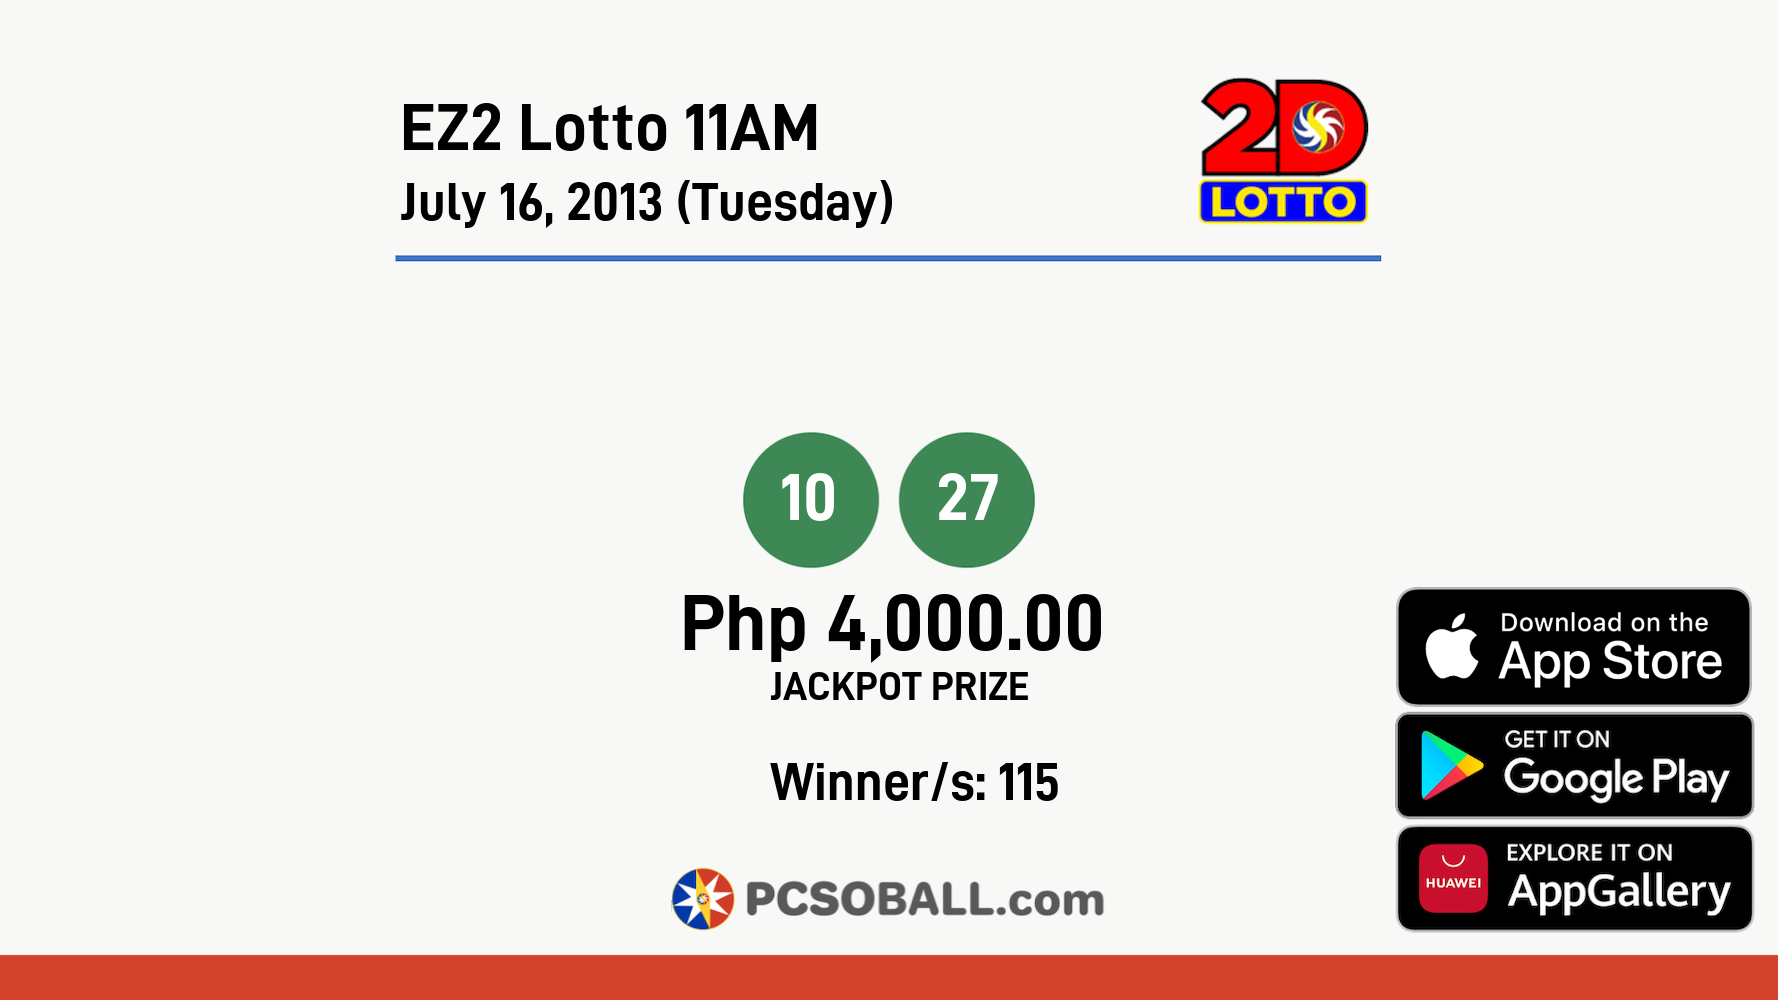 EZ2 Lotto 11AM July 16, 2013 (Tuesday) Result